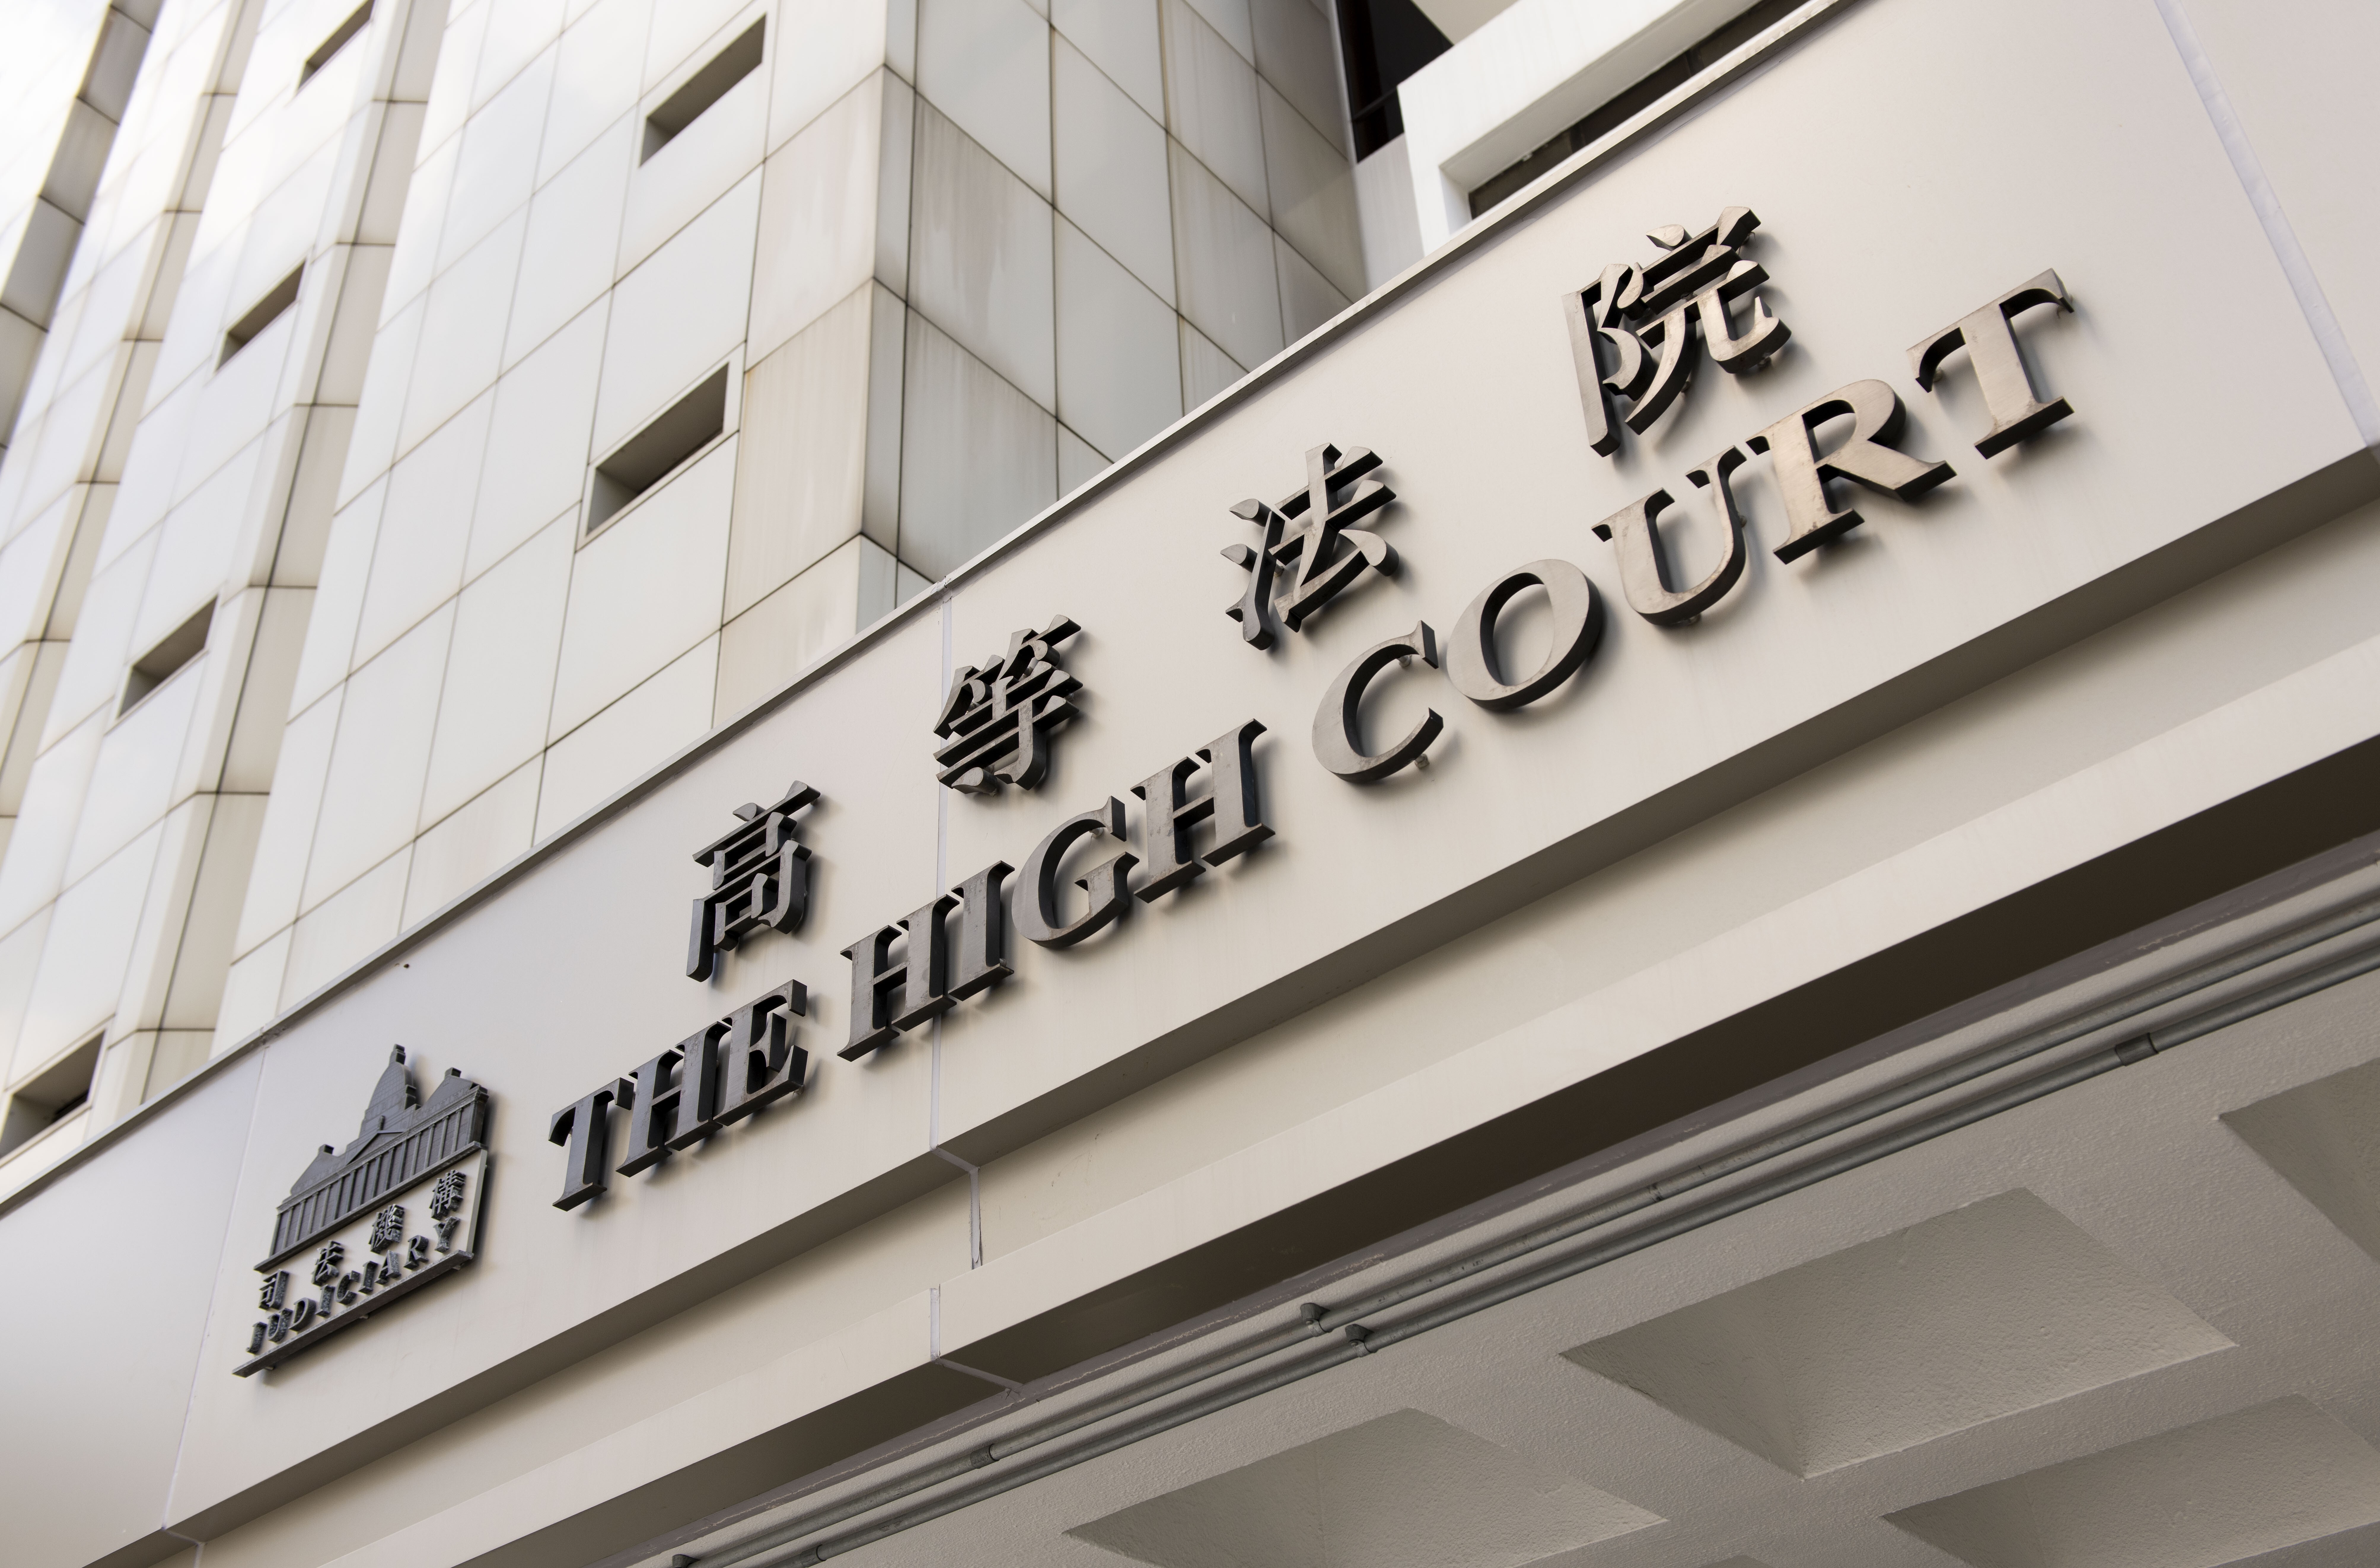 The High Court has thrown out a judicial review application sought by 803 Funds to name teachers found guilty of professional misconduct over the 2019 unrest. Photo: Warton Li